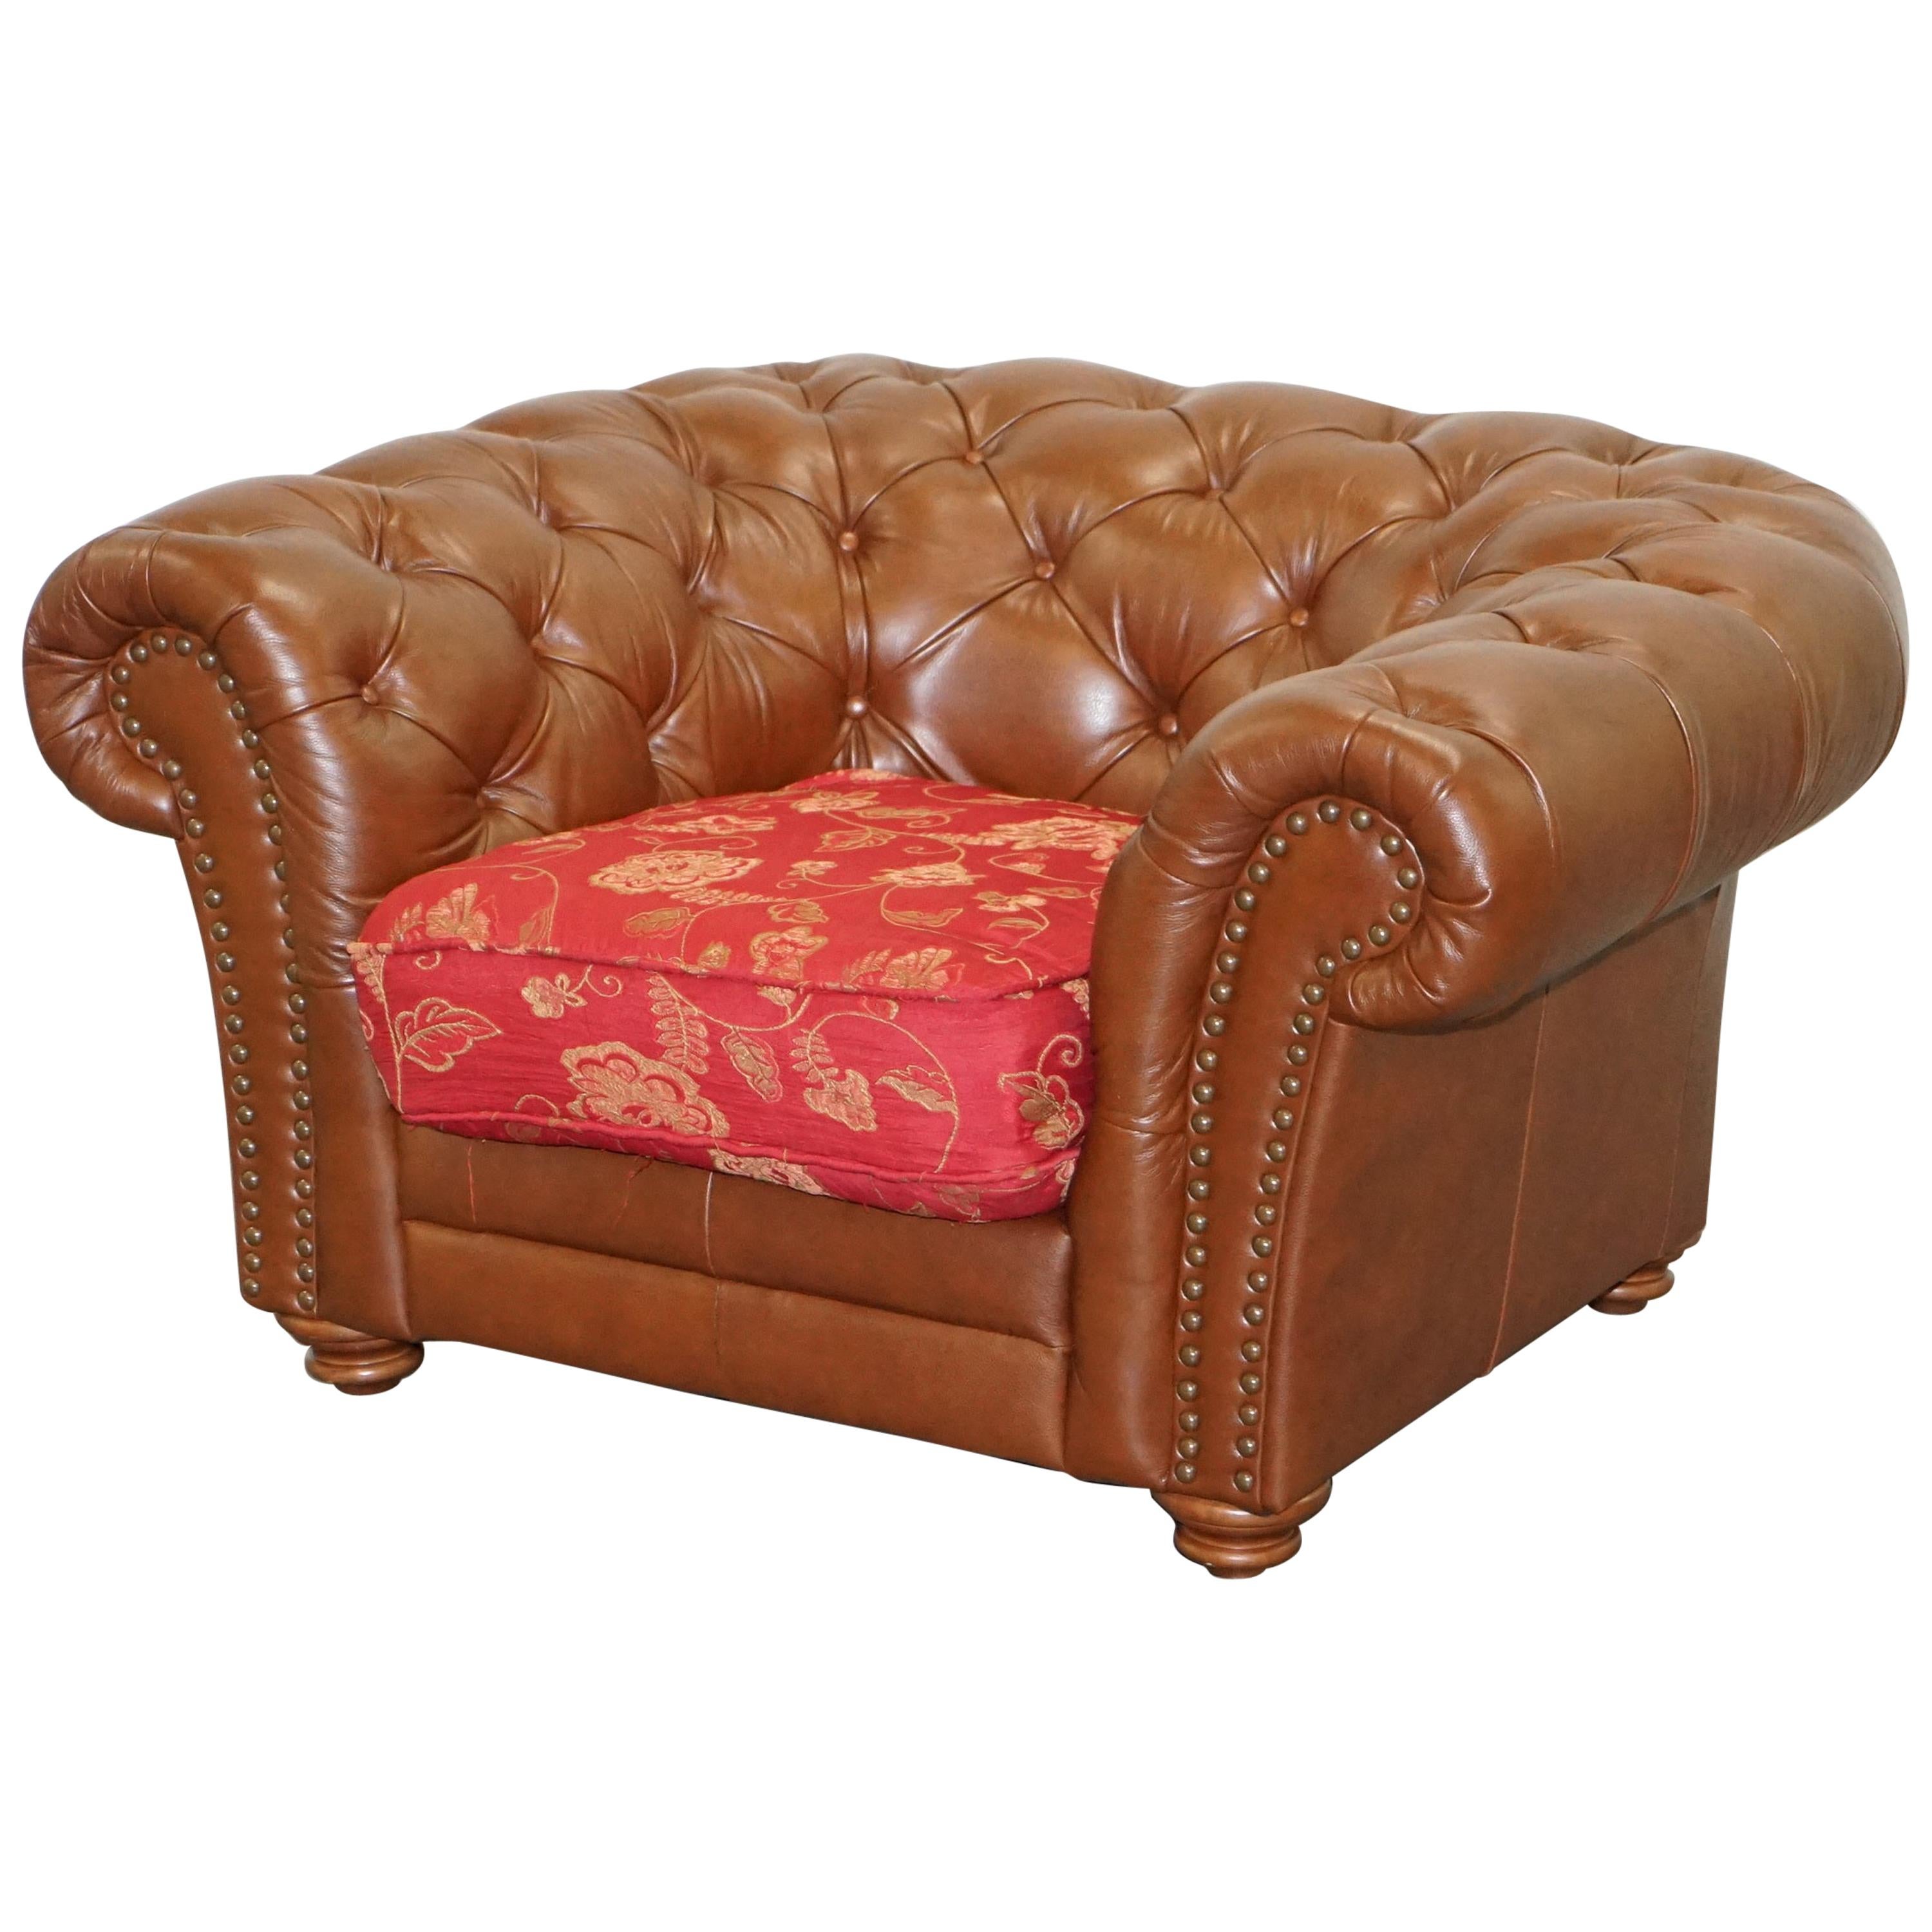 Tetrad Made in England Brown Leather Chesterfield Armchair Part of Full Suite For Sale